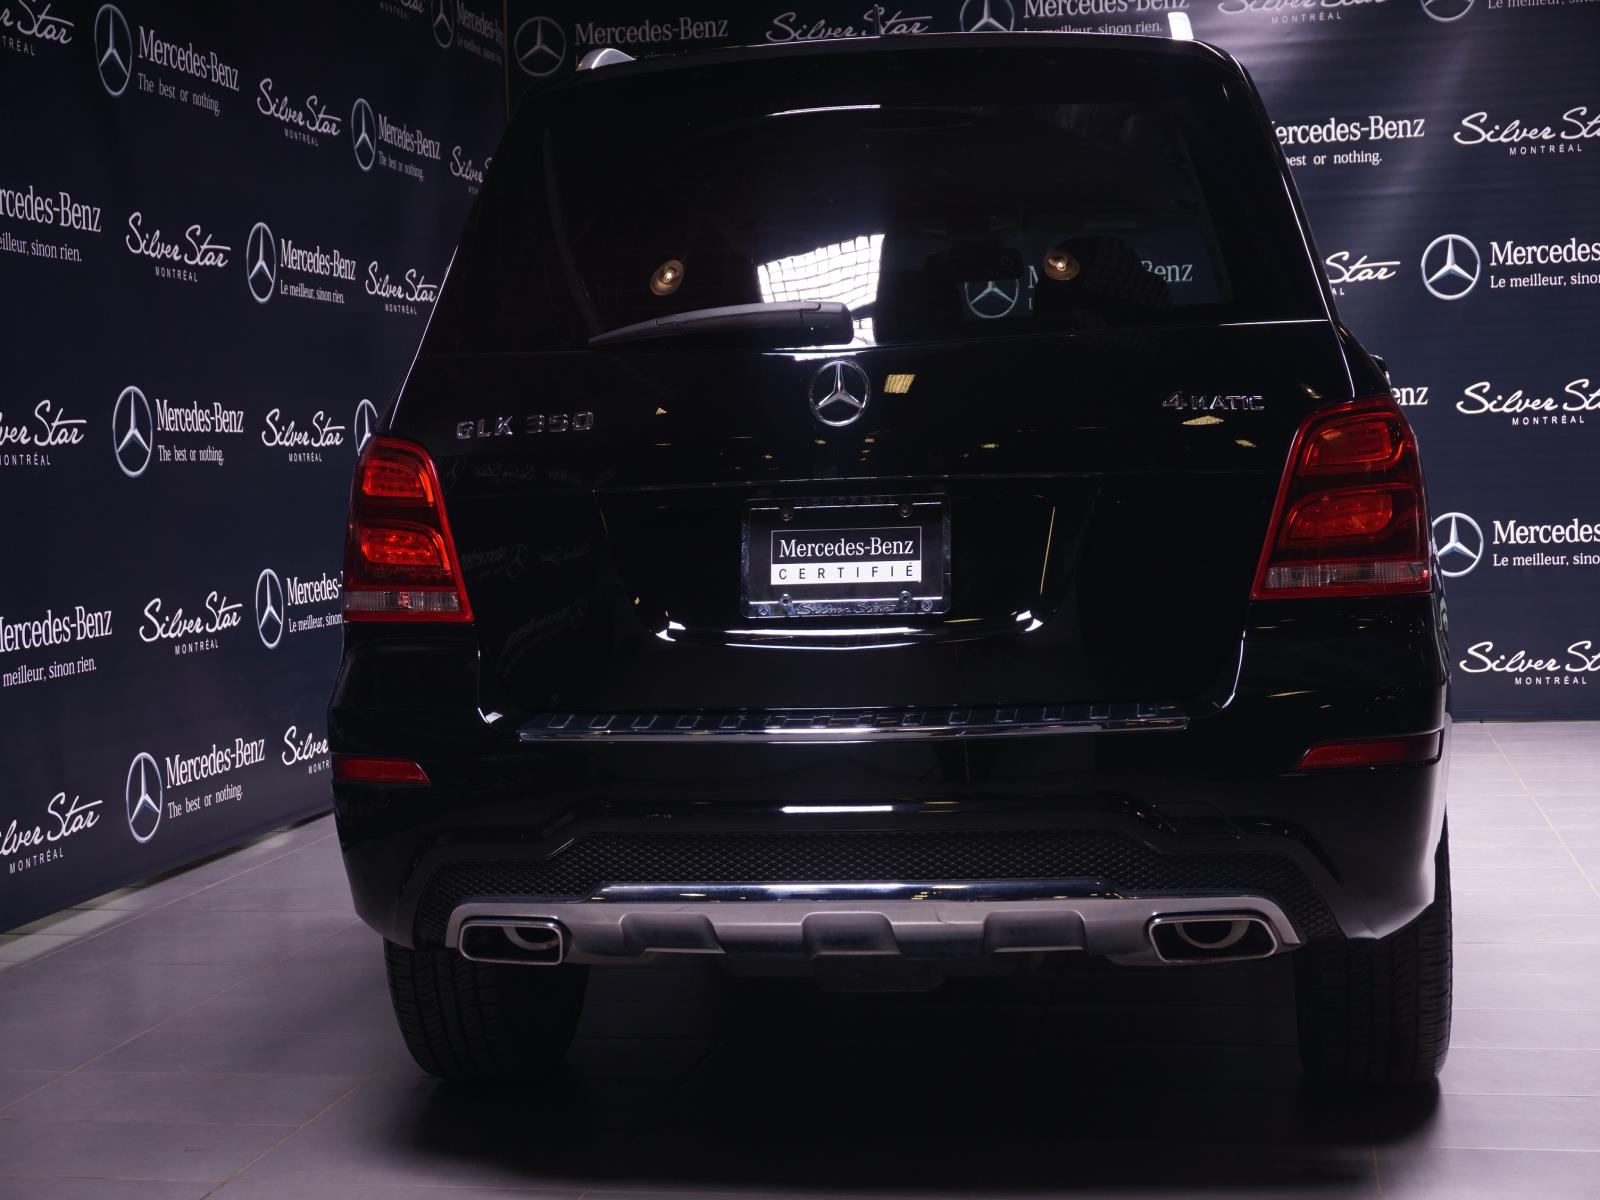 Used 2013 Mercedes-Benz GLK350 in Montreal,QC